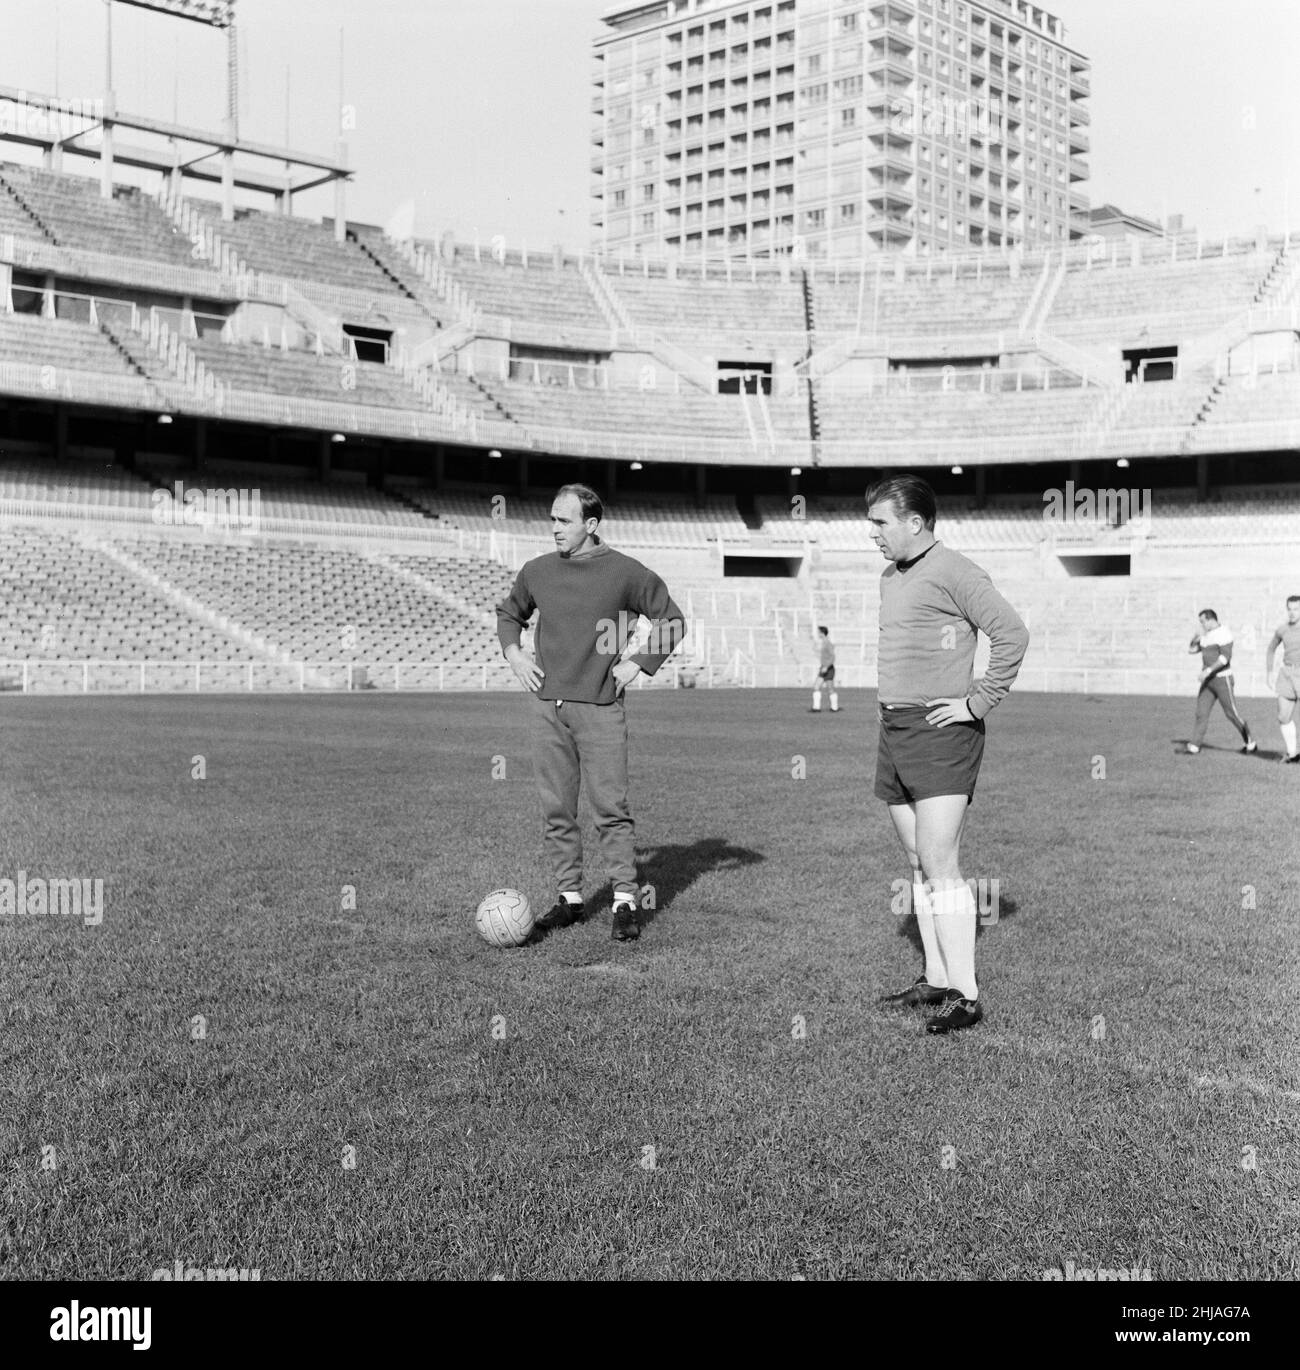 Behind the scenes at Real Madrid Football Club, Santiago Bernabeu Stadium, Madrid, Spain, 24th May 1964. Three days prior to European Cup Final v Inter Milan. Pictured, Ferenc Puskás (right) Stock Photo